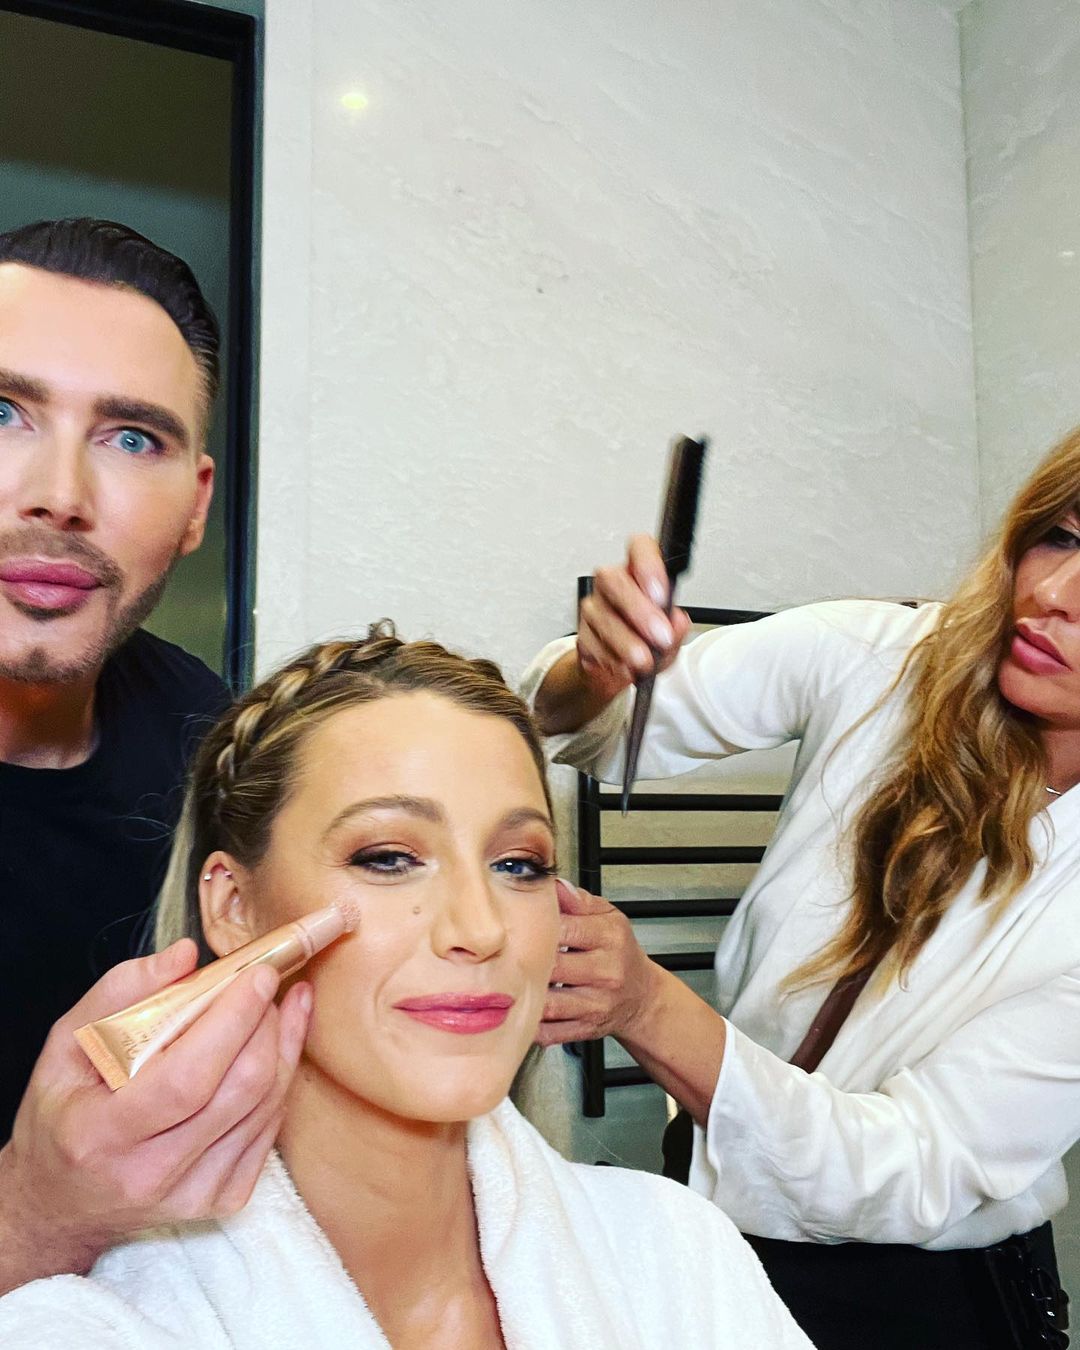 This is my Met glam team @kristoferbuckle and @jennifer_yepez Yes they are gorgeous inside and out. Yes they make me feel gorgeous inside and out. Can’t forget @enamelle who’s not pictured.  I love you three. And thank you @charlottetilbury for the gorgeous makeup. There’s a reason everything you create is the best— because it radiates just like you. Dream Glam Crew all around ✨ #charlottetilburypartner